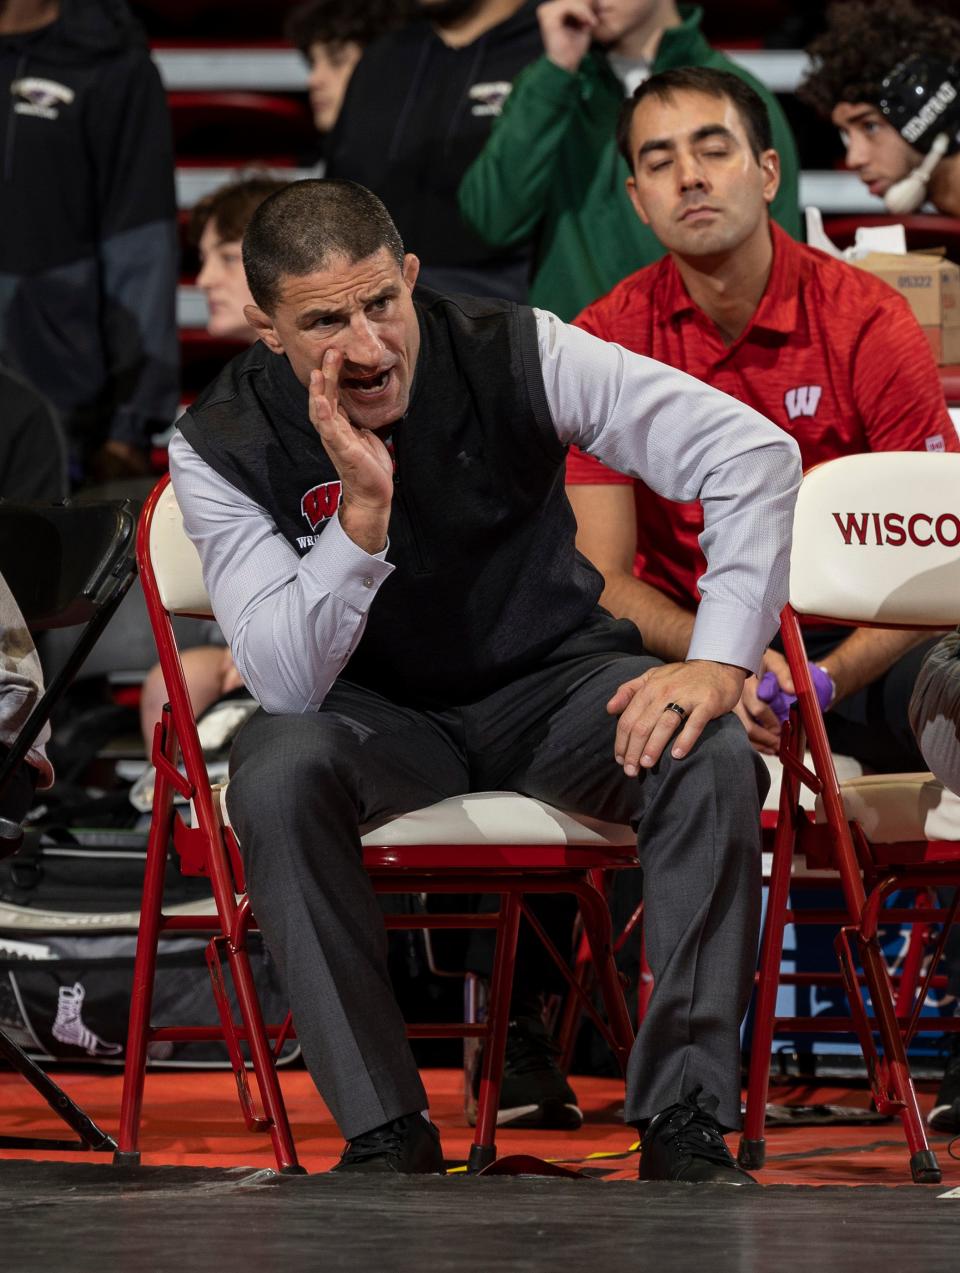 Chris Bono, Wisconsin's head wrestling coach since 2018, has guided the Badgers to a 6-1 start to the season and a ranking of 11th.